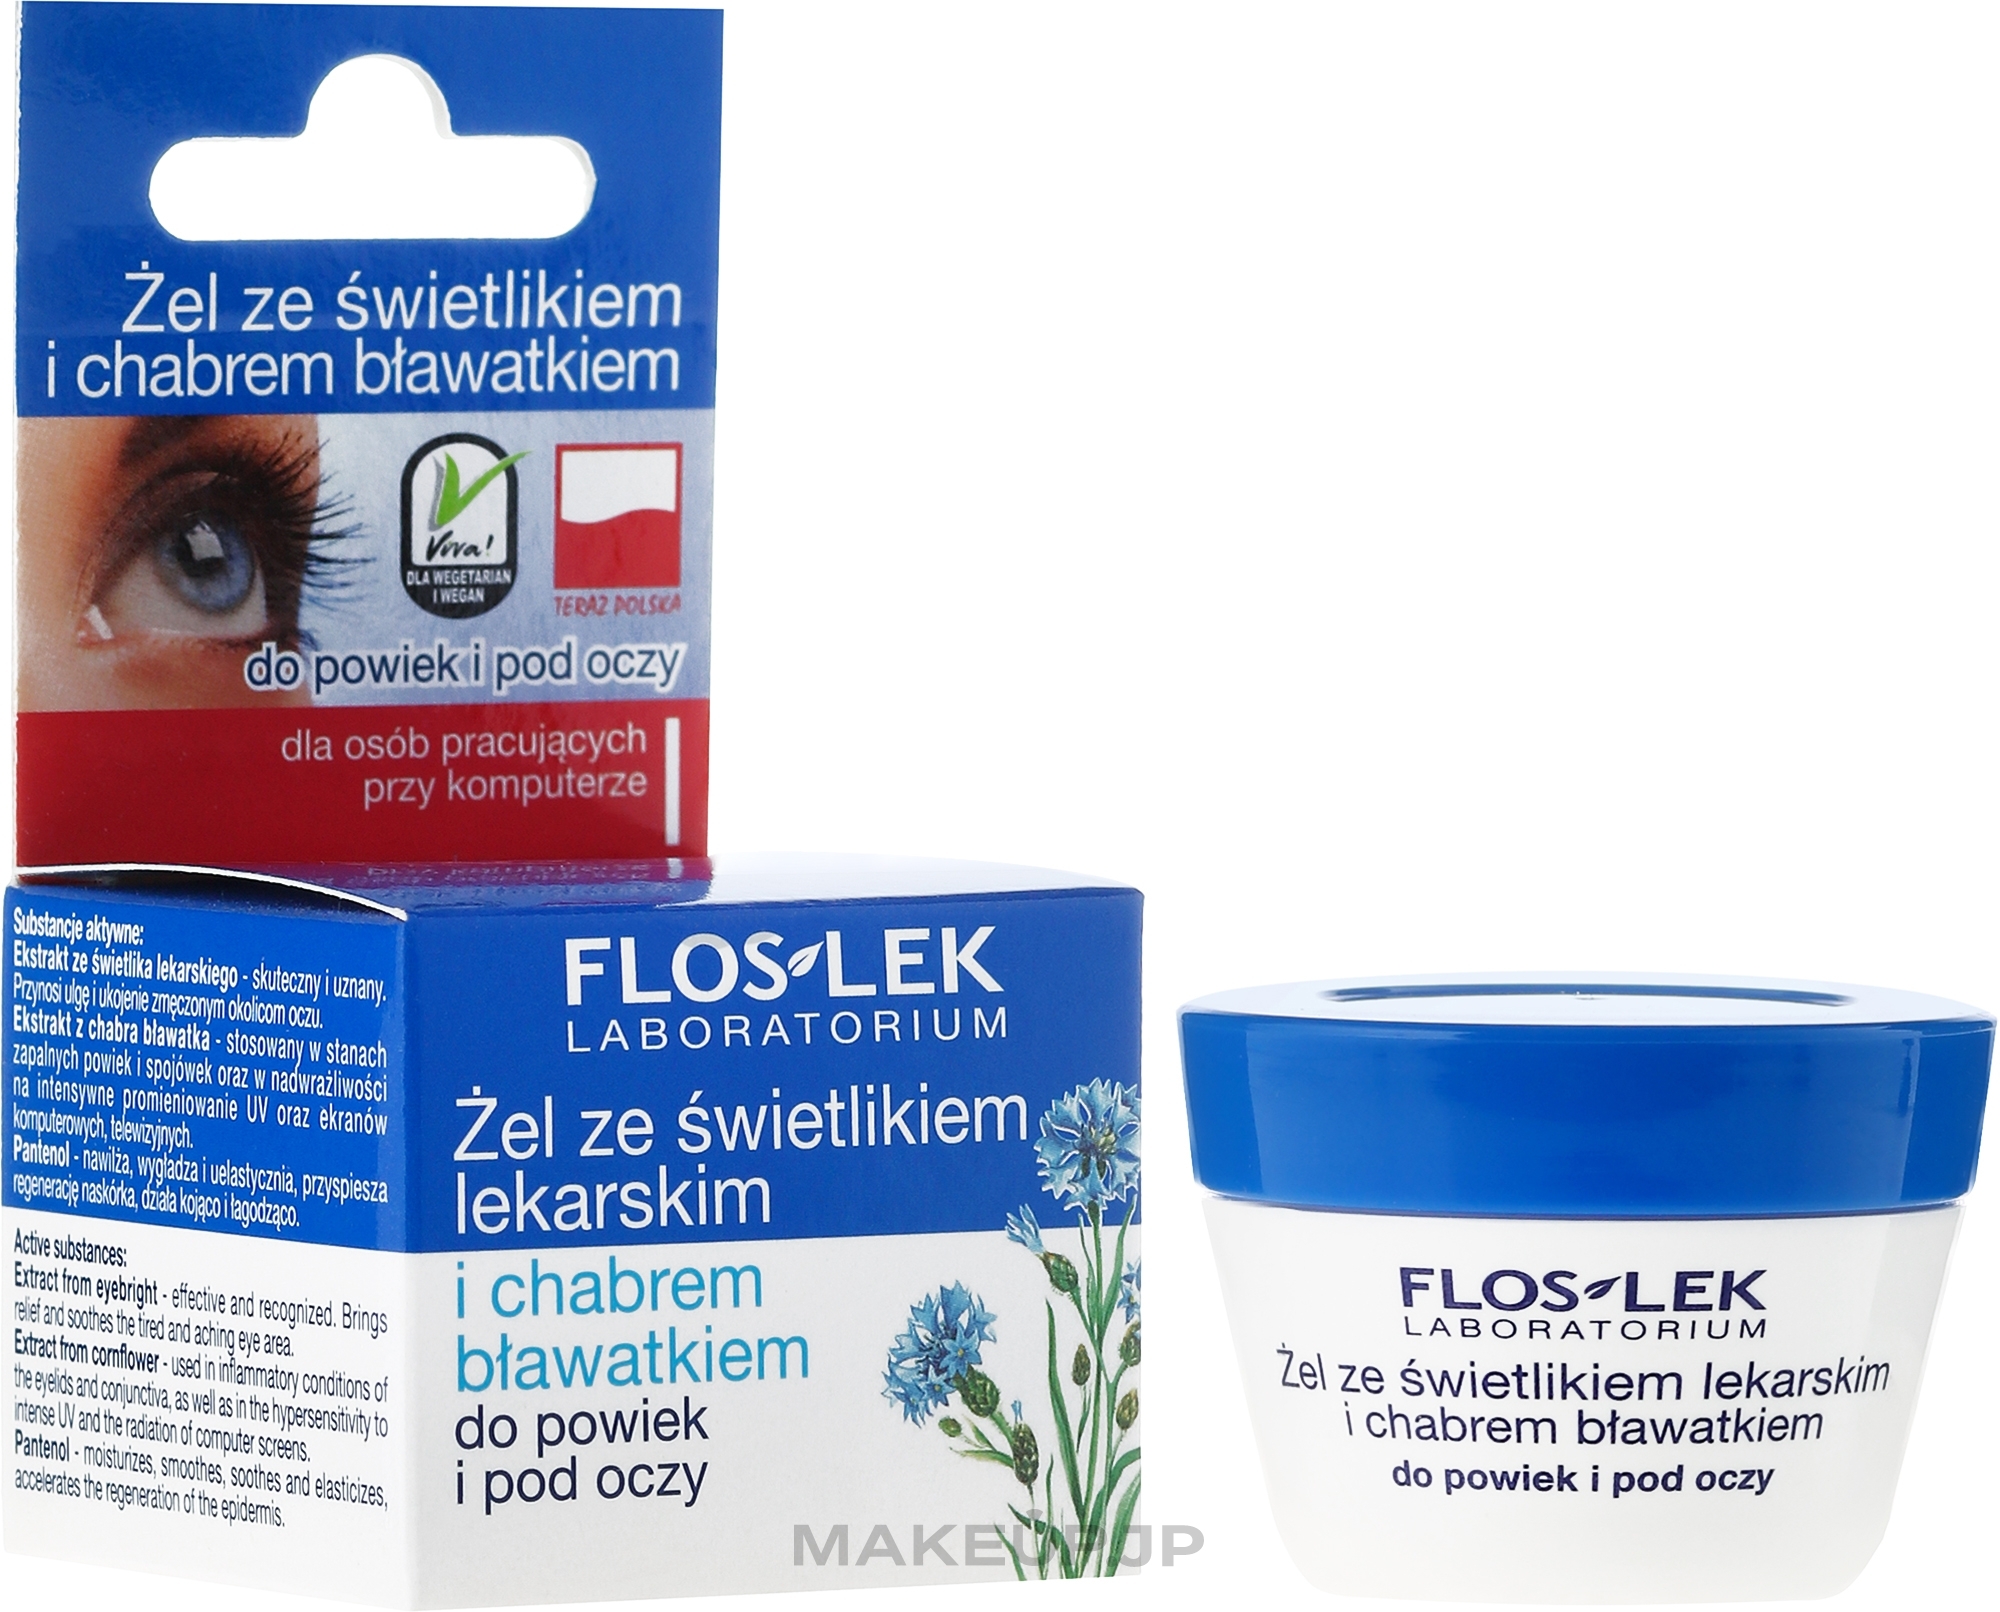 Lid and Under Anti-Aging Eye Gel with Eyebright and Cornflower - Floslek Lid And Under Eye Gel With Eyebright And Cornflower  — photo 10 g